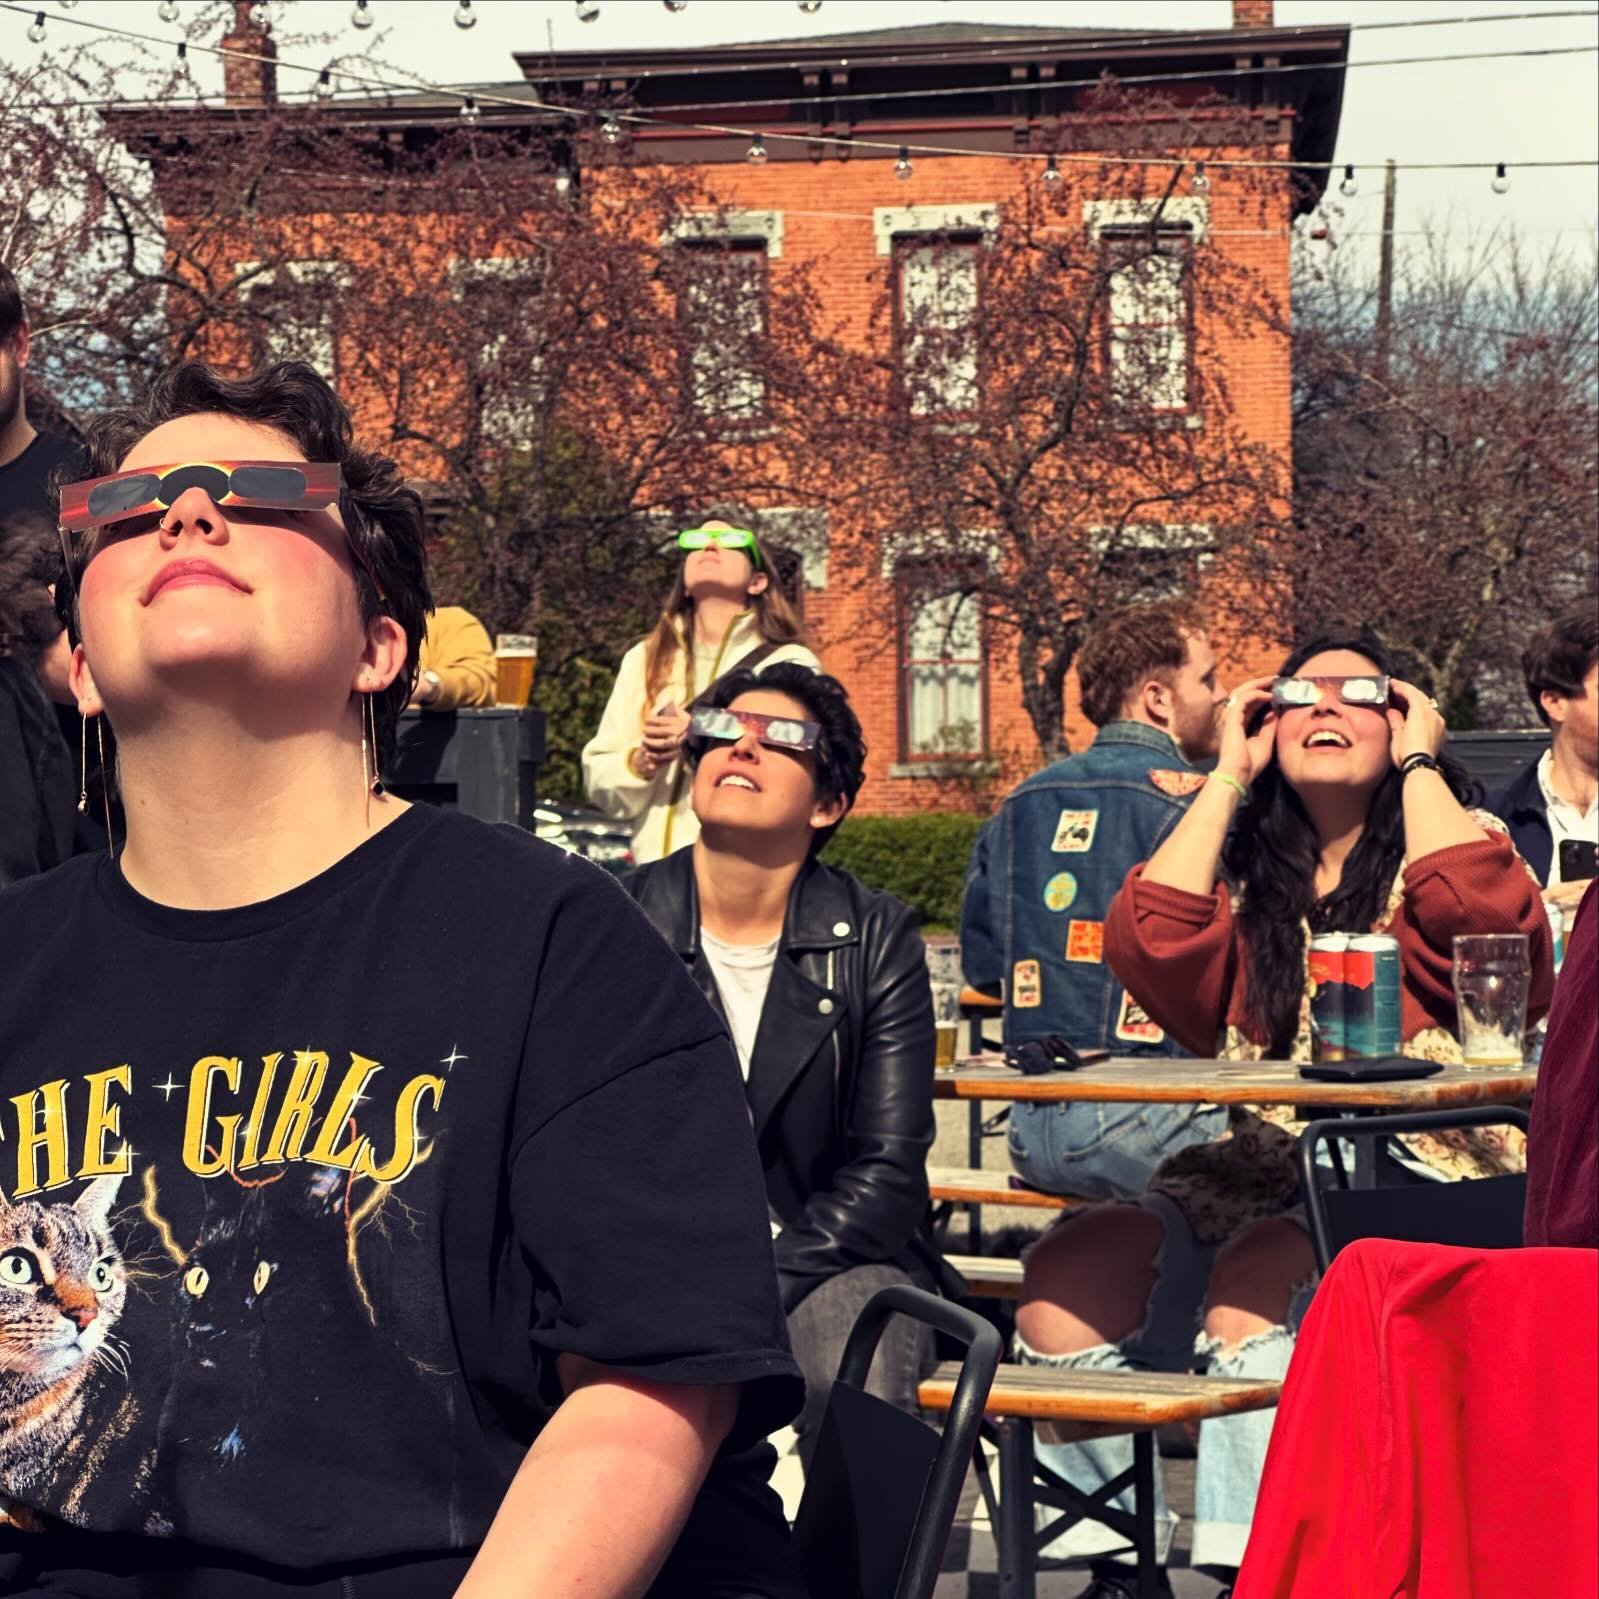 We experienced (almost) totality at WYLDE today! Thank you Hudson for turning out 
🌒🌑🌘✌️

&mdash;&mdash;​​​​​​​​​​​​​​​​​​​​​​​​​​​​​​​​​​​​​​​​​​​​​​​​​​​​​​​​​​​​​​​​
See you there.​​​​​​​​​​​​​​​​​​​​​​​​​​​​​​​​​​​​​​​​​​​​​​​​​​​​​​​​​​​​​​​​